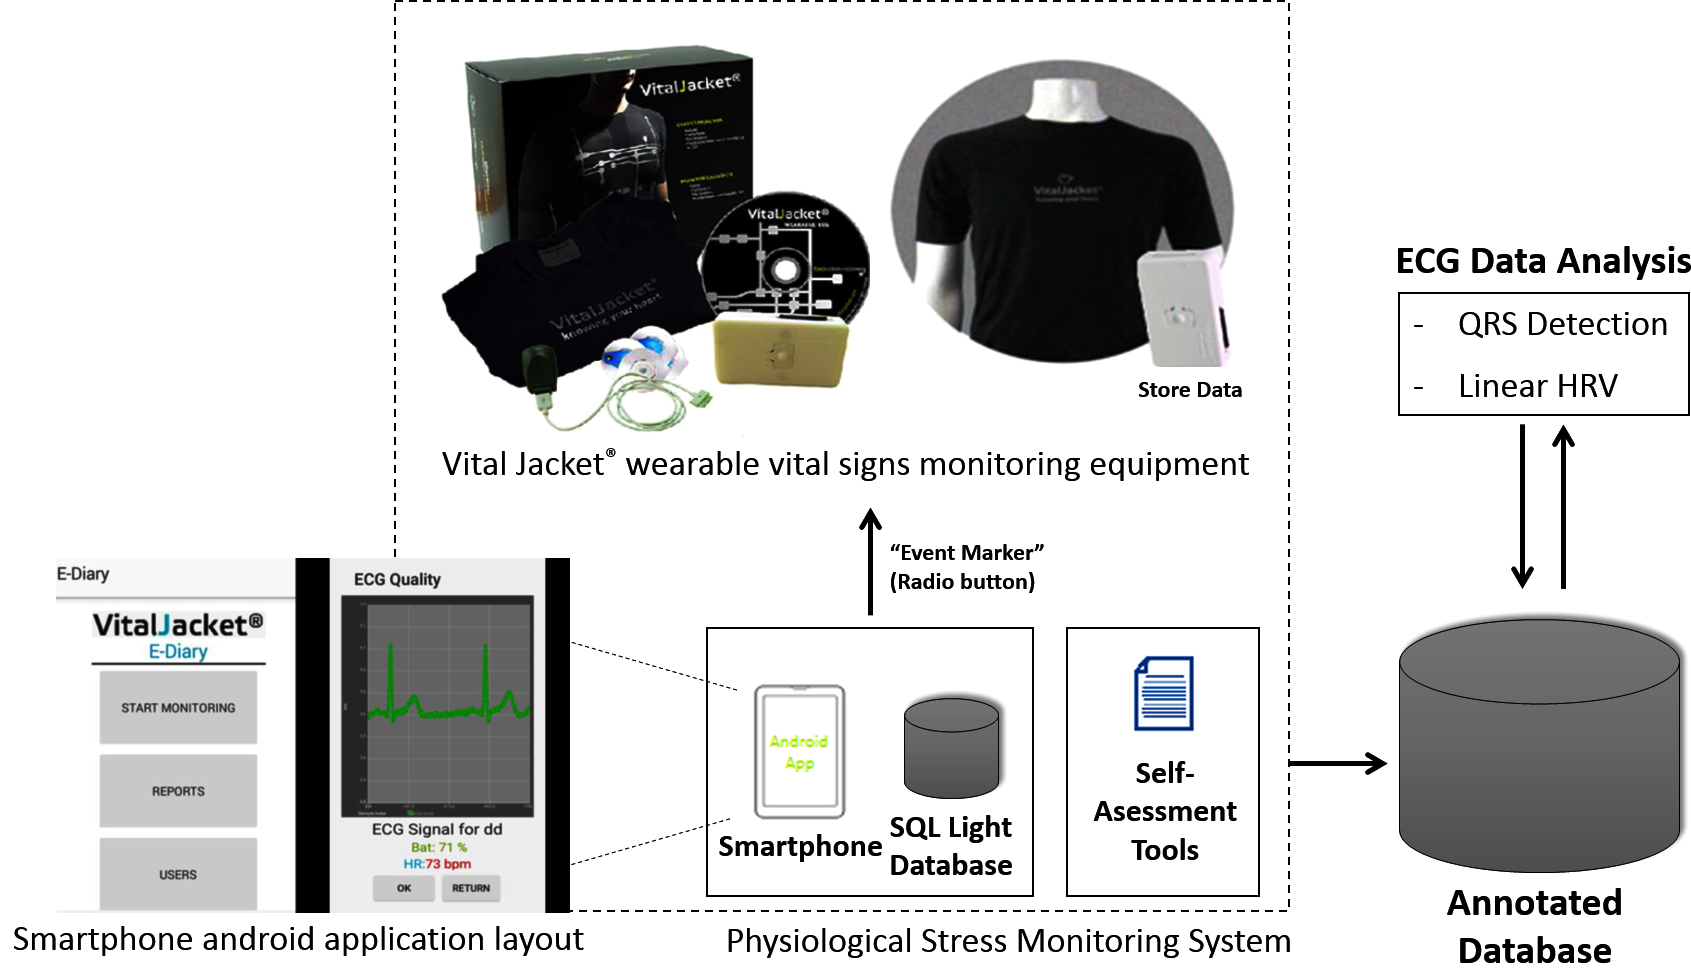 Human condition monitoring system (Rodrigues et al., 2018)